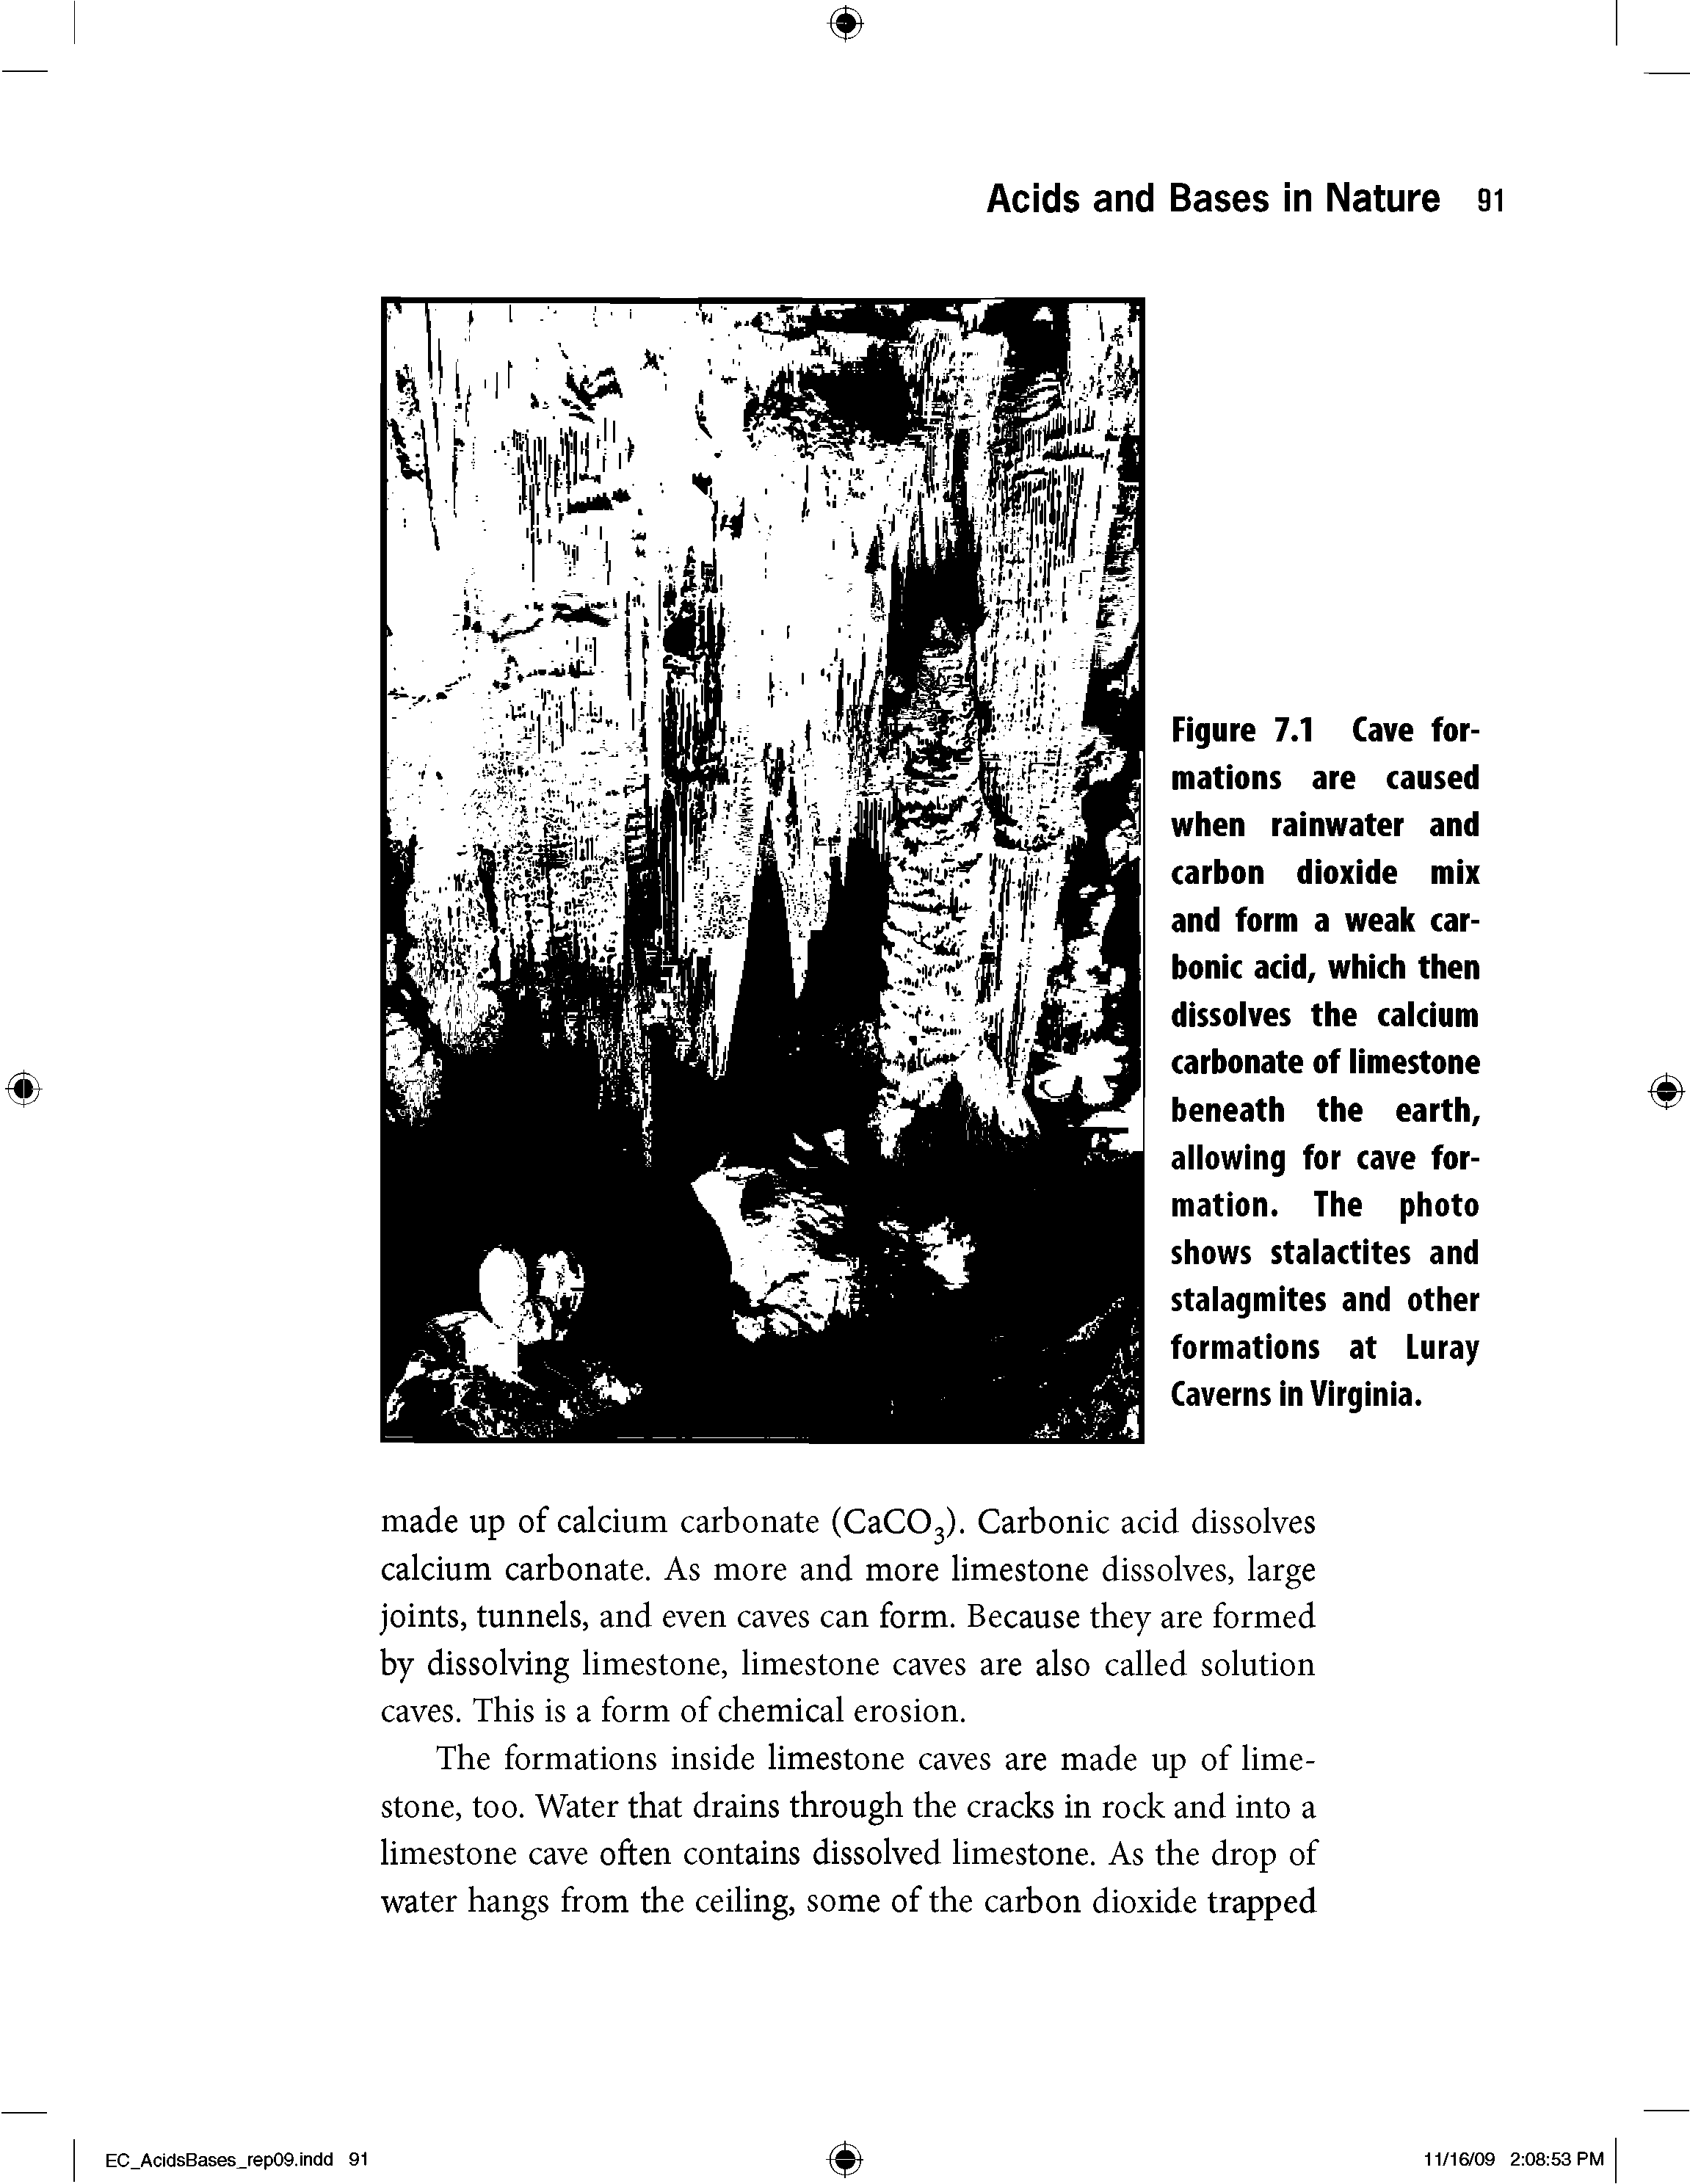 Figure 7.1 Cave formations are caused when rainwater and carbon dioxide mix and form a weak carbonic acid, which then dissolves the calcium carbonate of limestone beneath the earth, allowing for cave formation. The photo shows stalactites and stalagmites and other formations at Luray Caverns in Virginia.